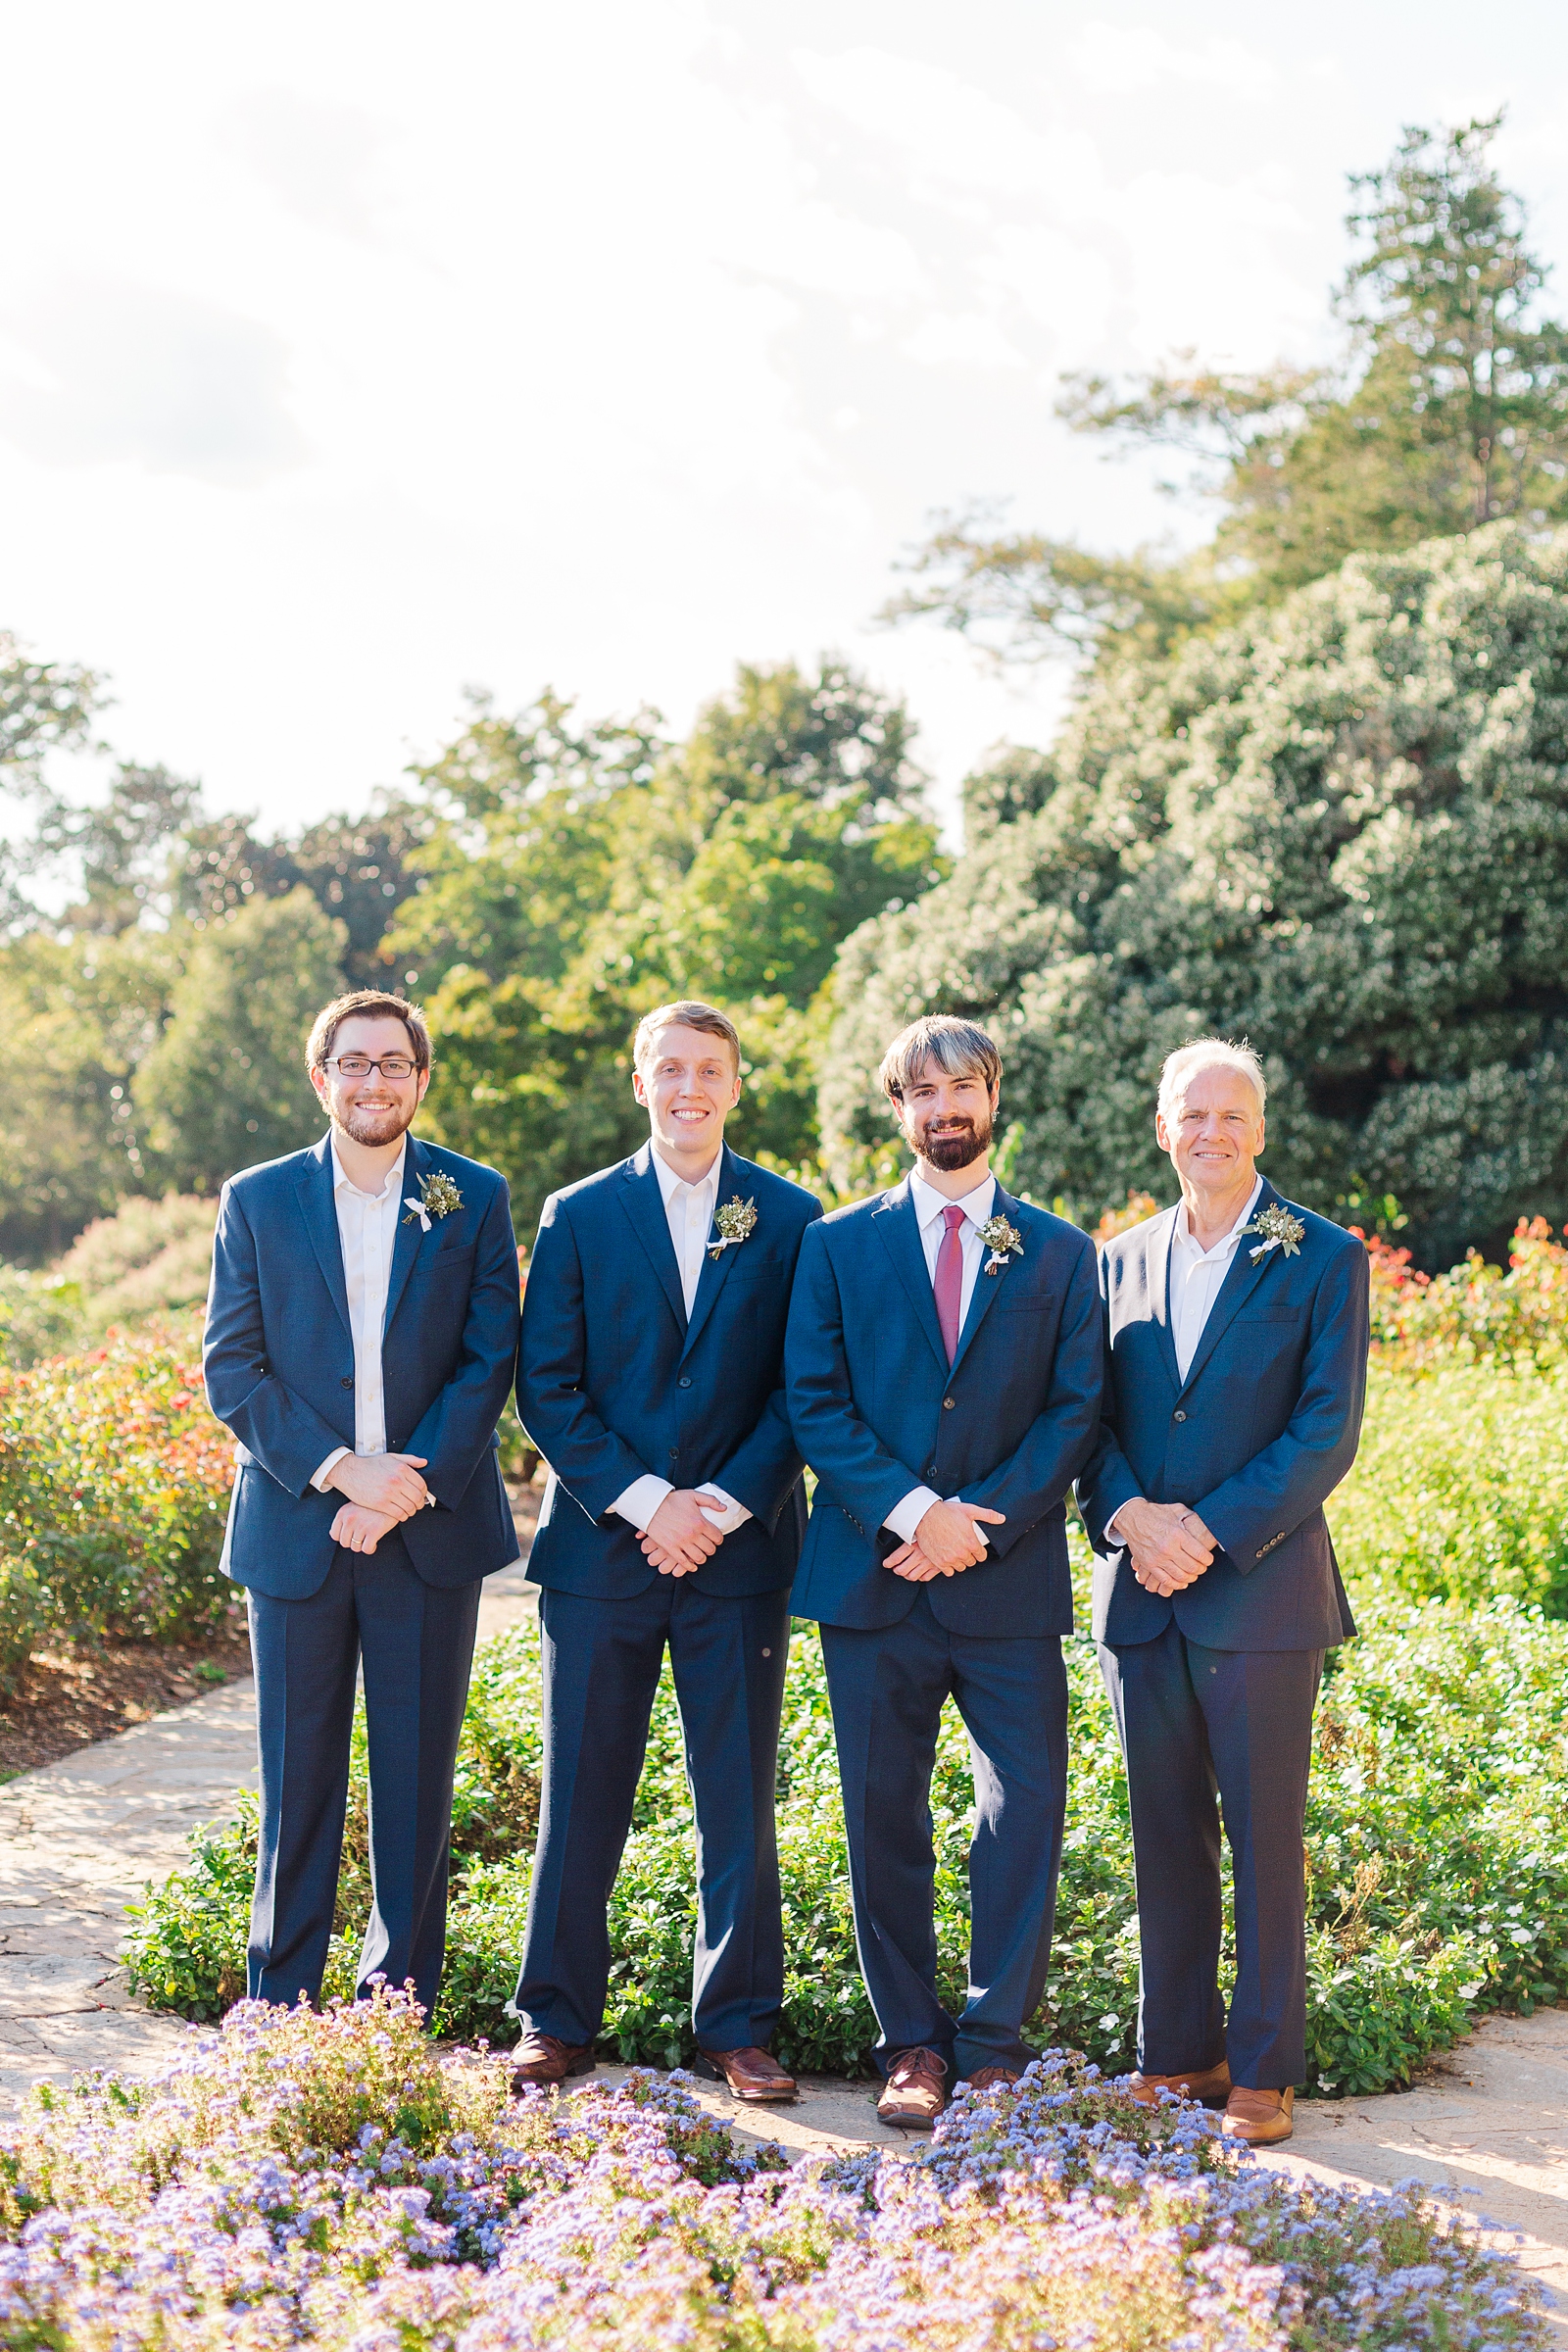 Groomsmen Portraits in the Italian Gardens at Maymont. Photography by Richmond Wedding Photographer Kailey Brianne Photography.